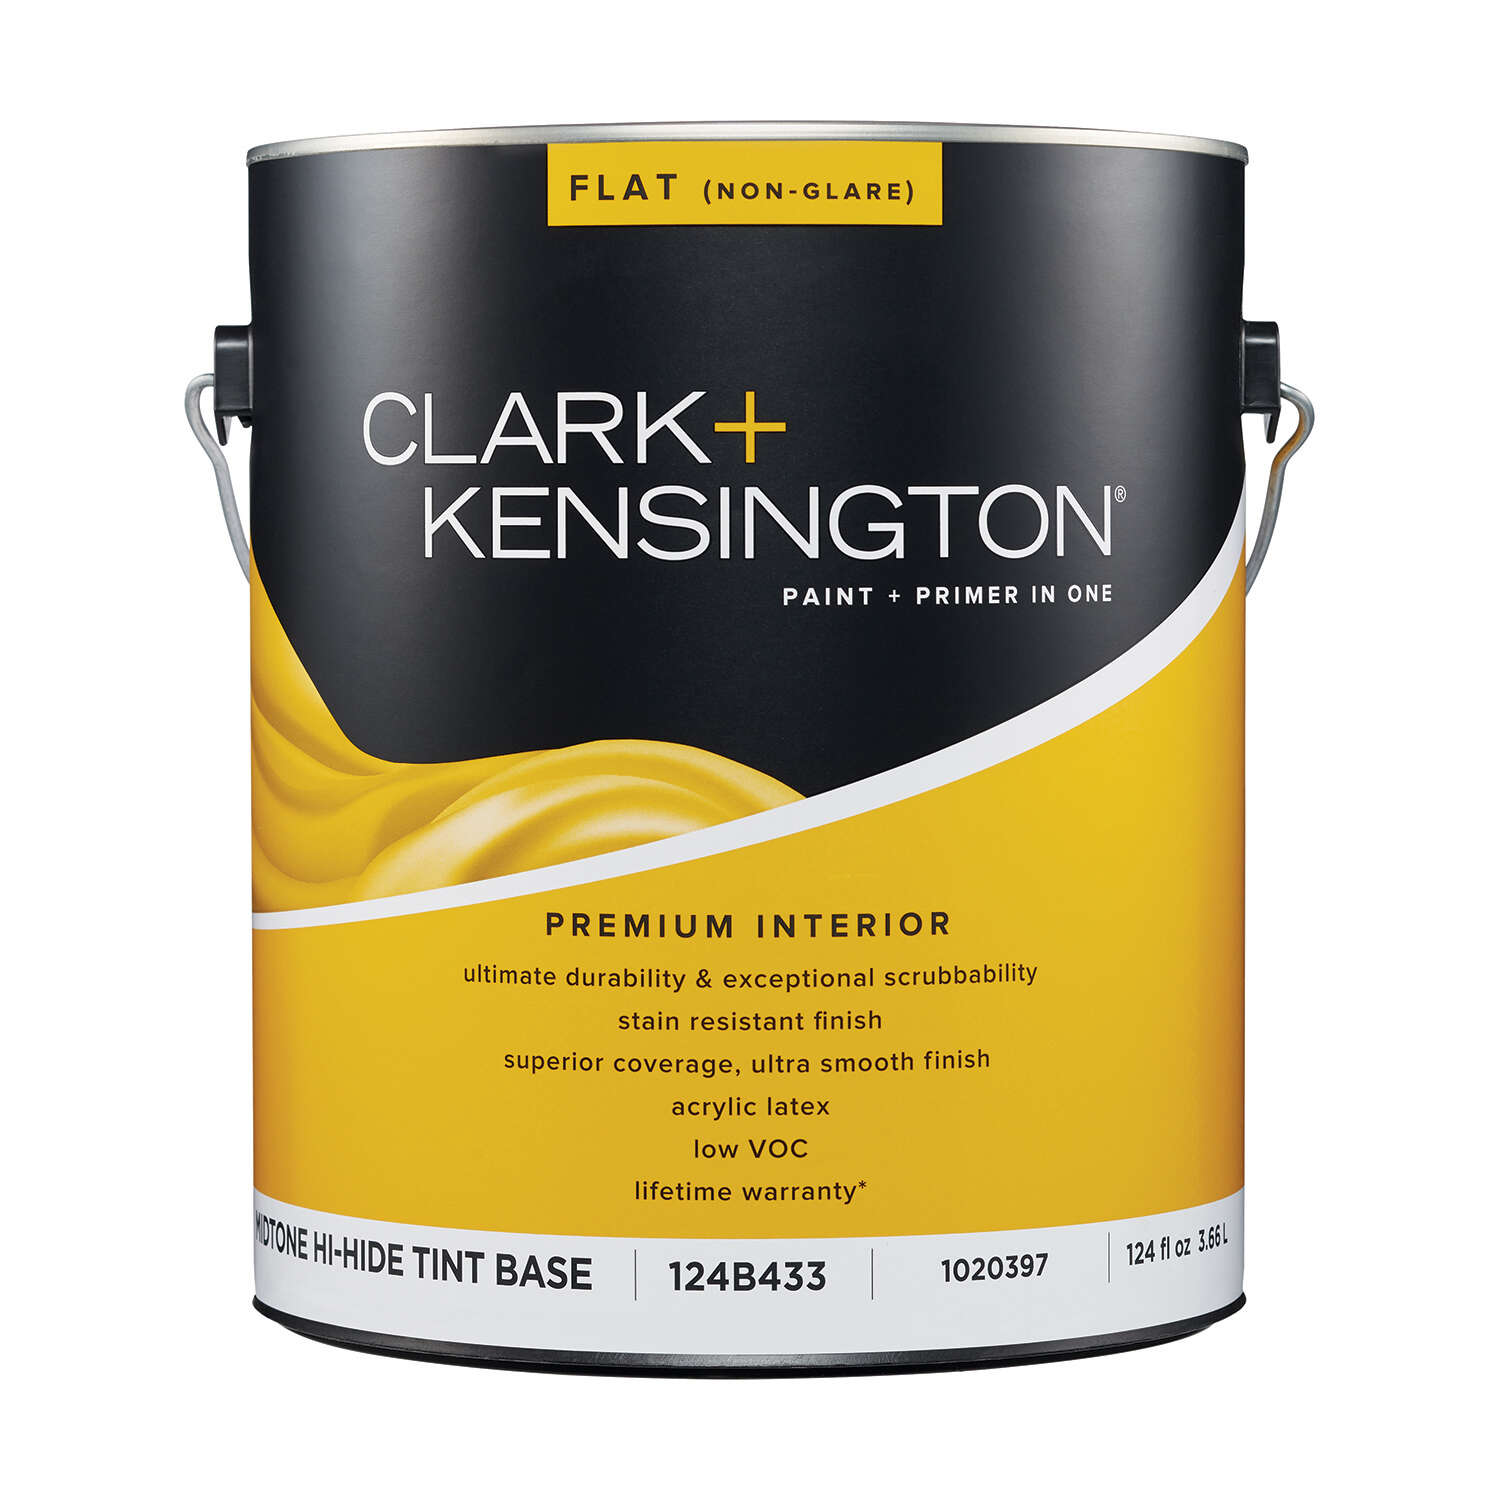 Ace Hardware: 50% Off Select Clark+Kensington Paint Gallons from $18 + Free Store Pickup